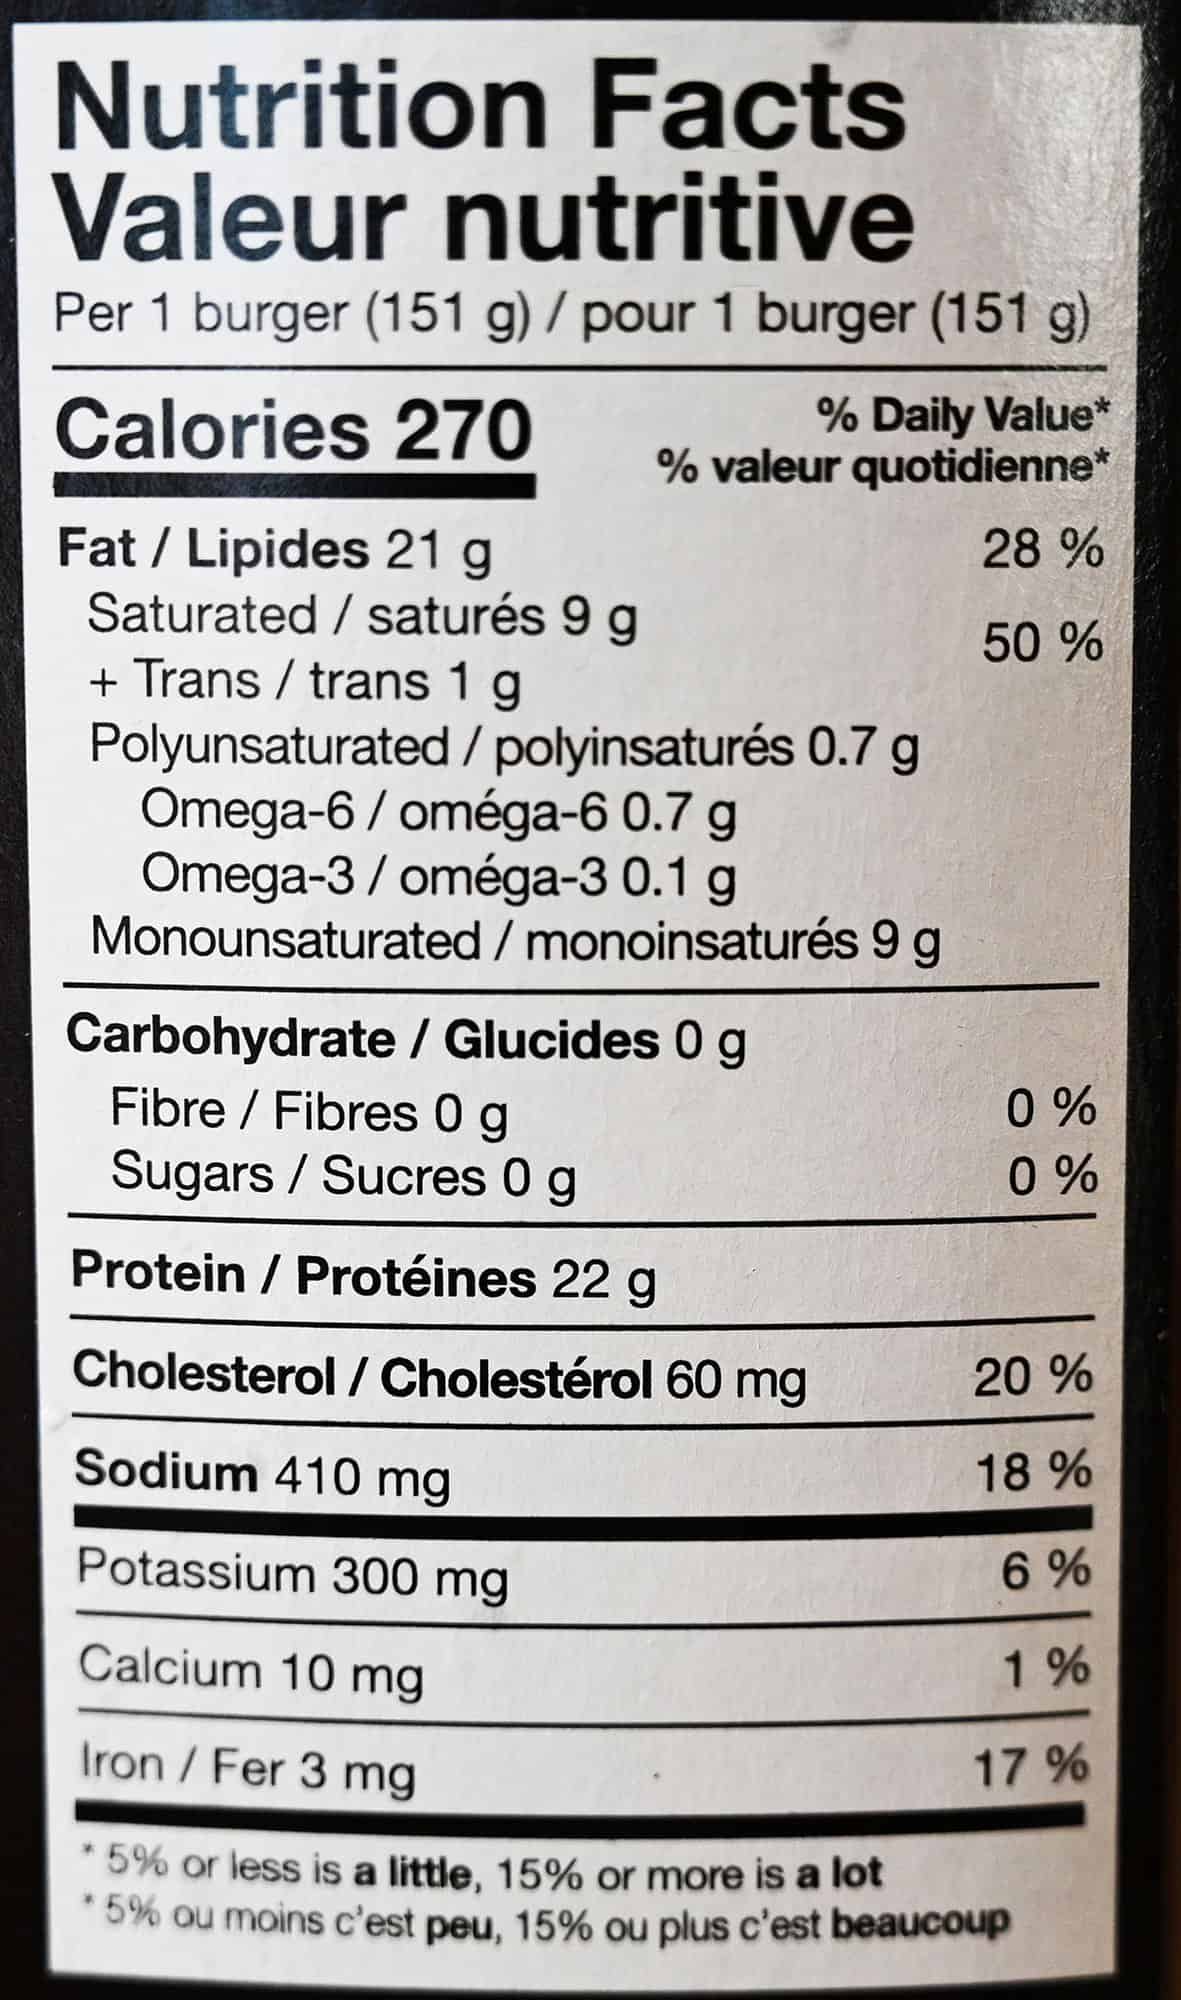 Image of nutrition facts from box. 